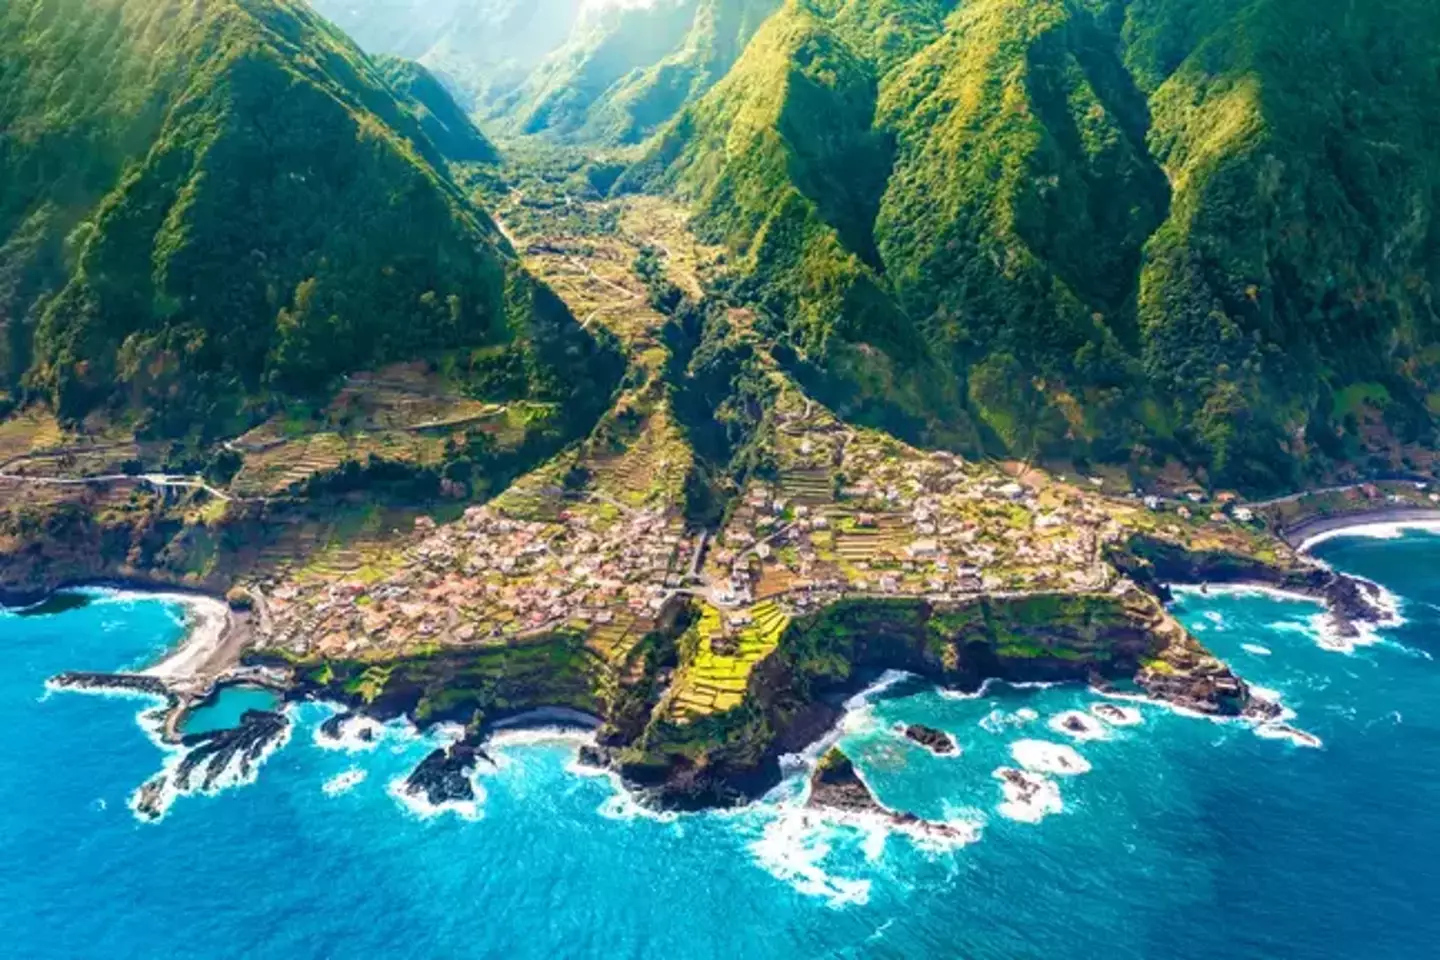 Visitors have called Madeira the 'Hawaii of Europe'.